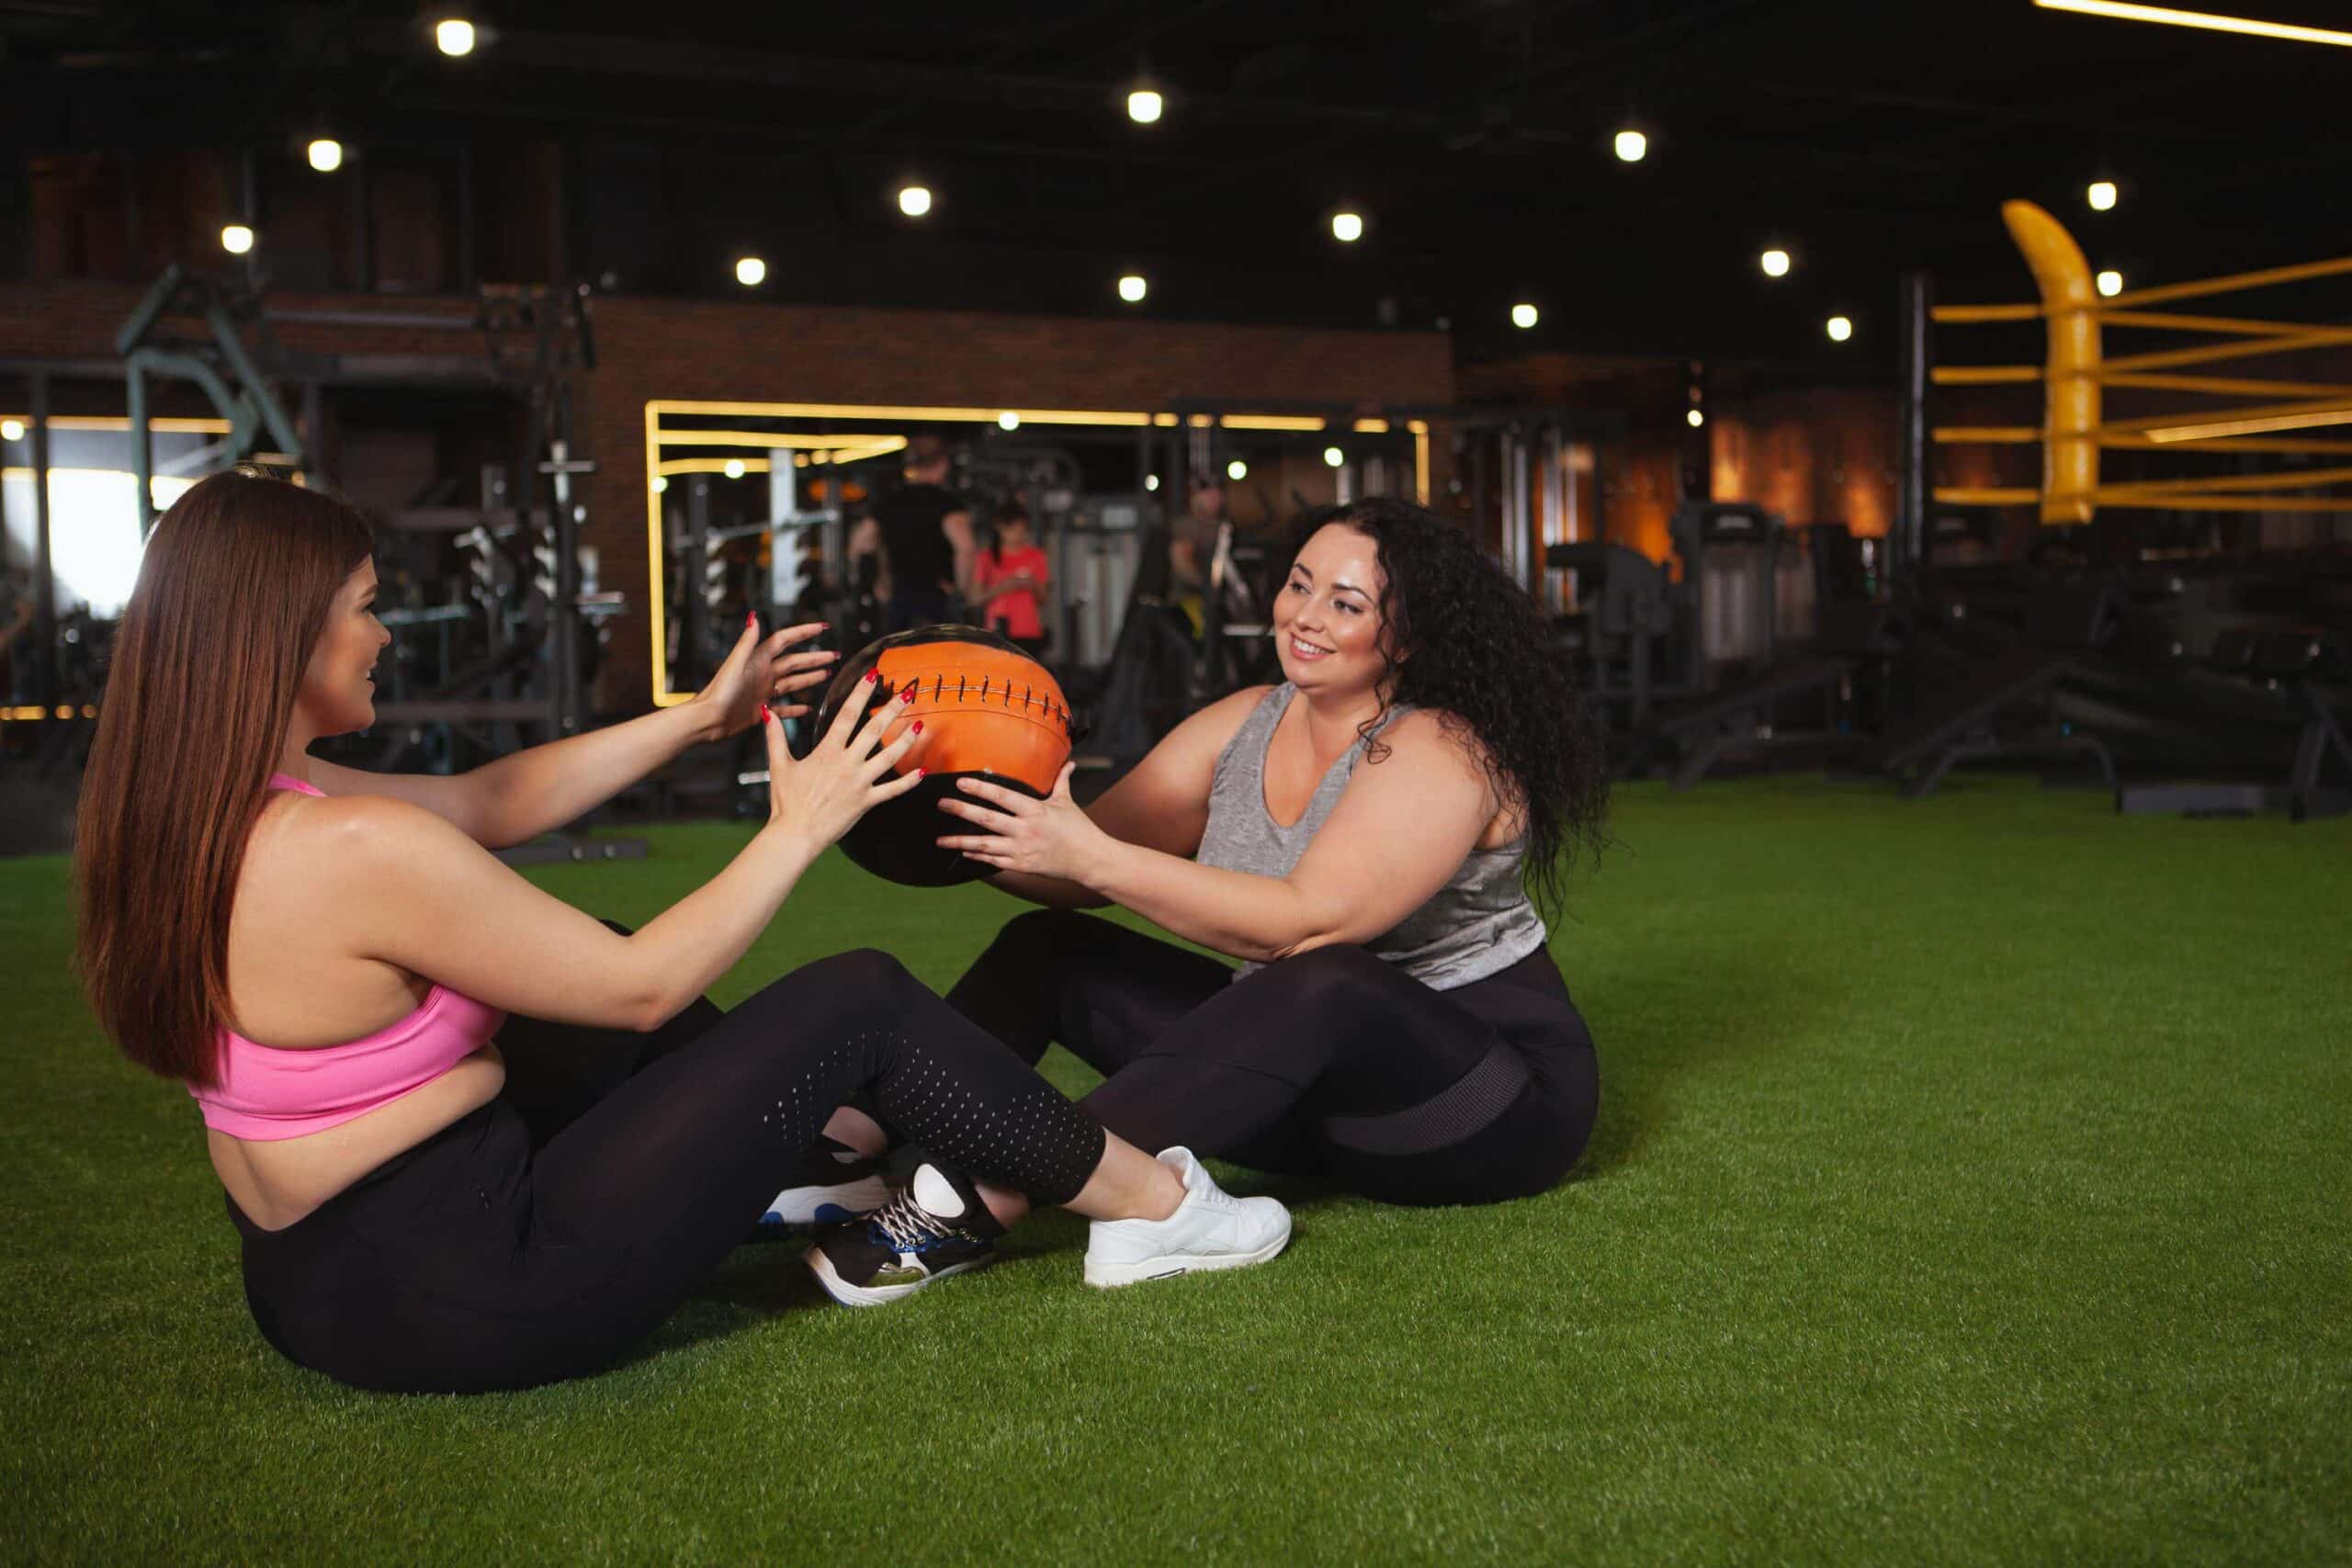 women exercise together in the gym scaled